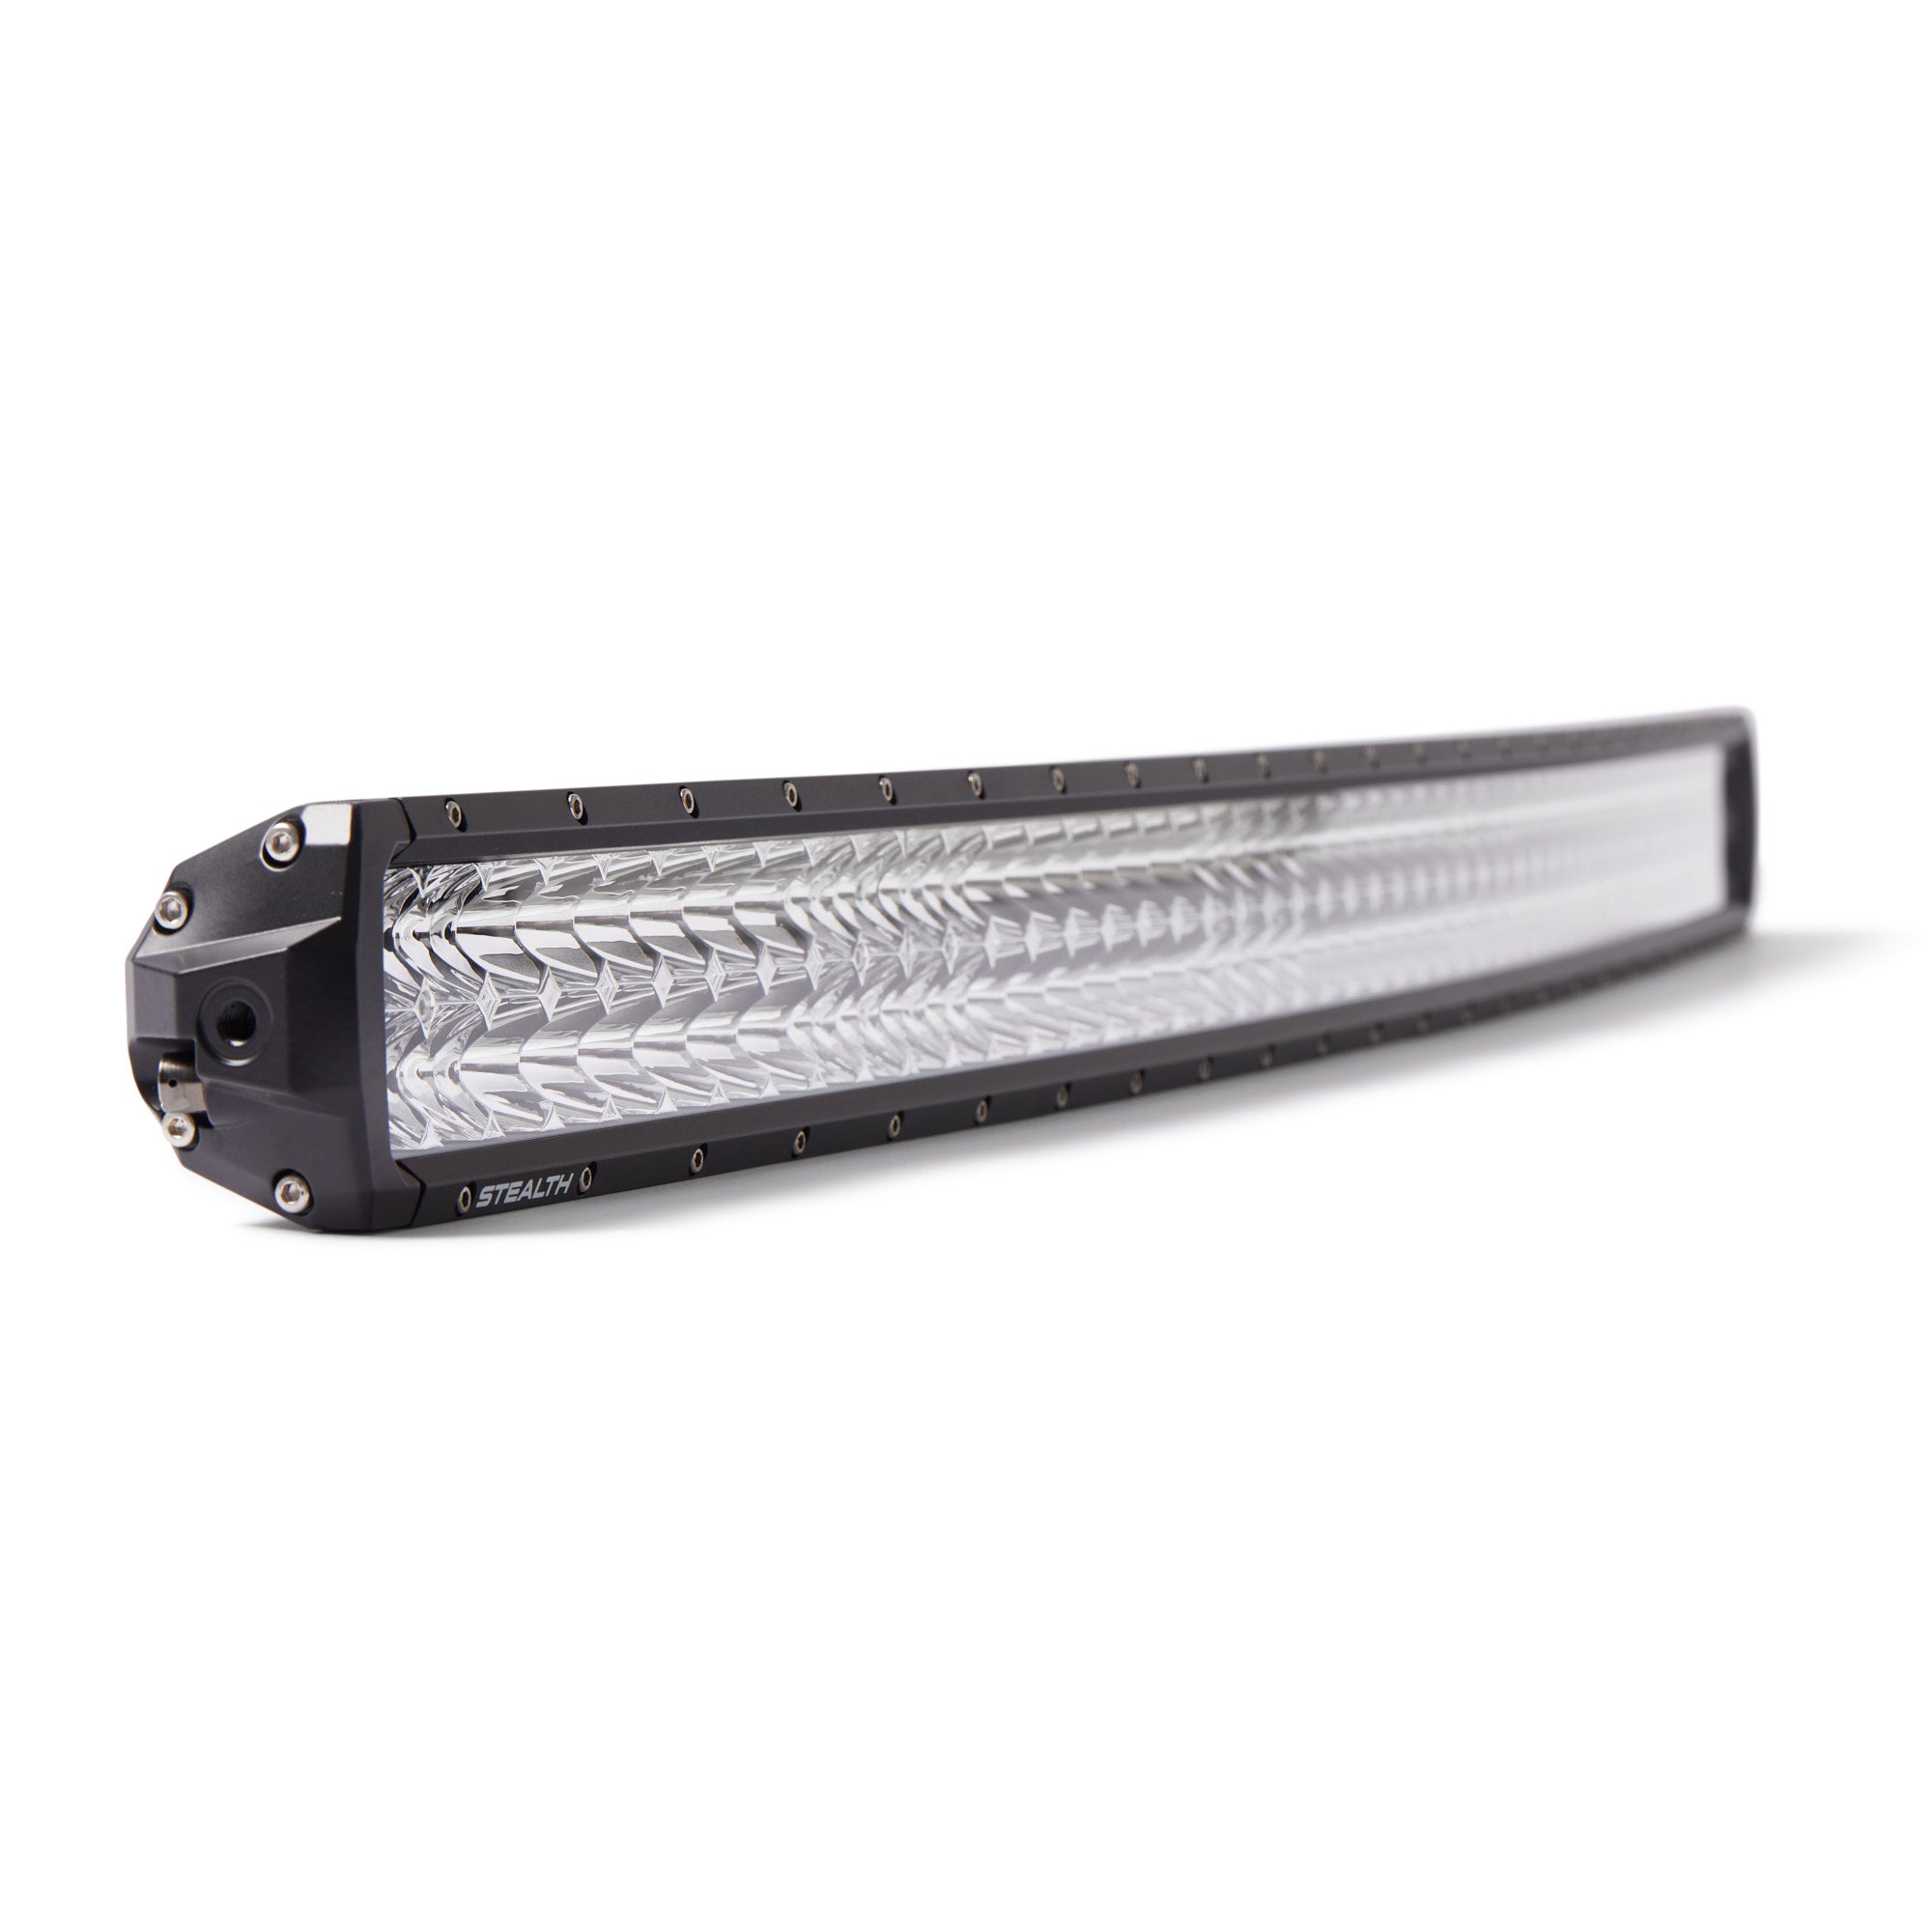 40 Stealth Curved C Series LED Light Bar - Offroad Industries